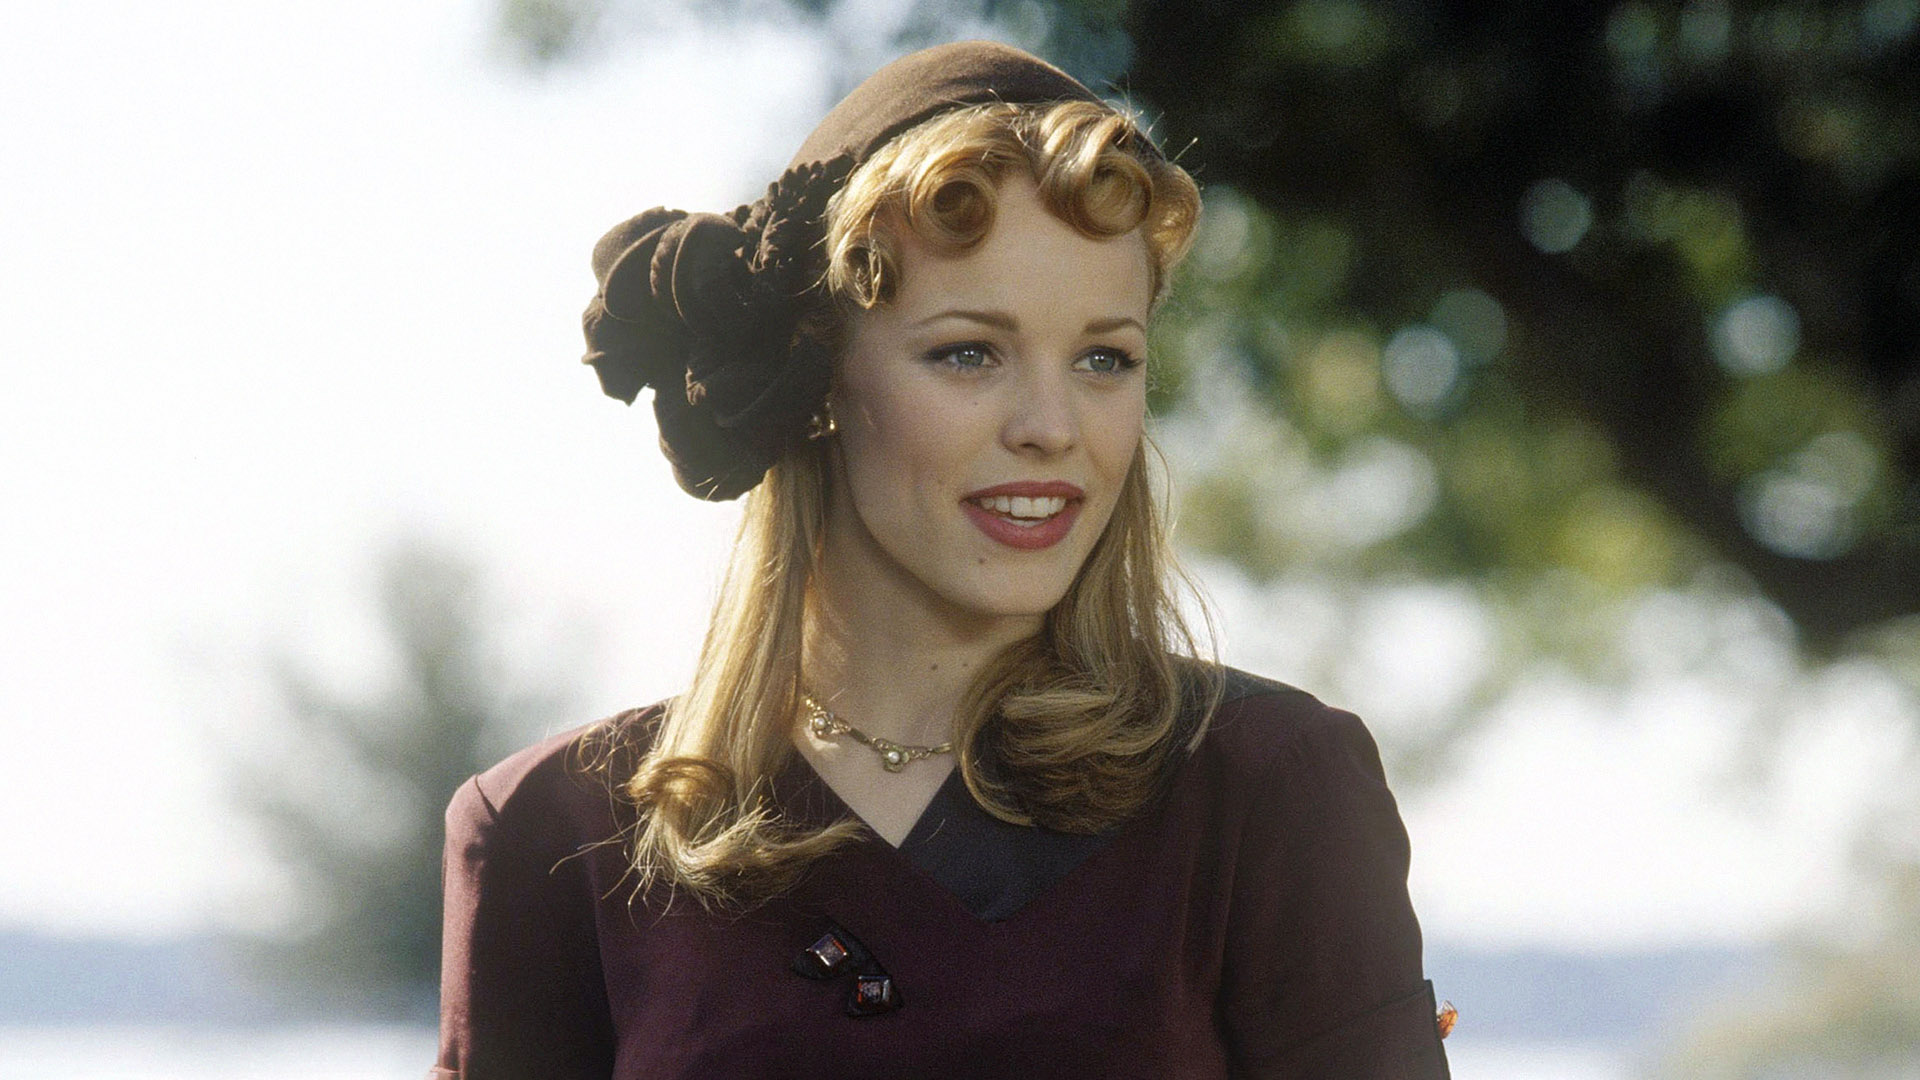 Behind-the-Scenes Feud That Almost Got Rachel McAdams Fired from The Notebook